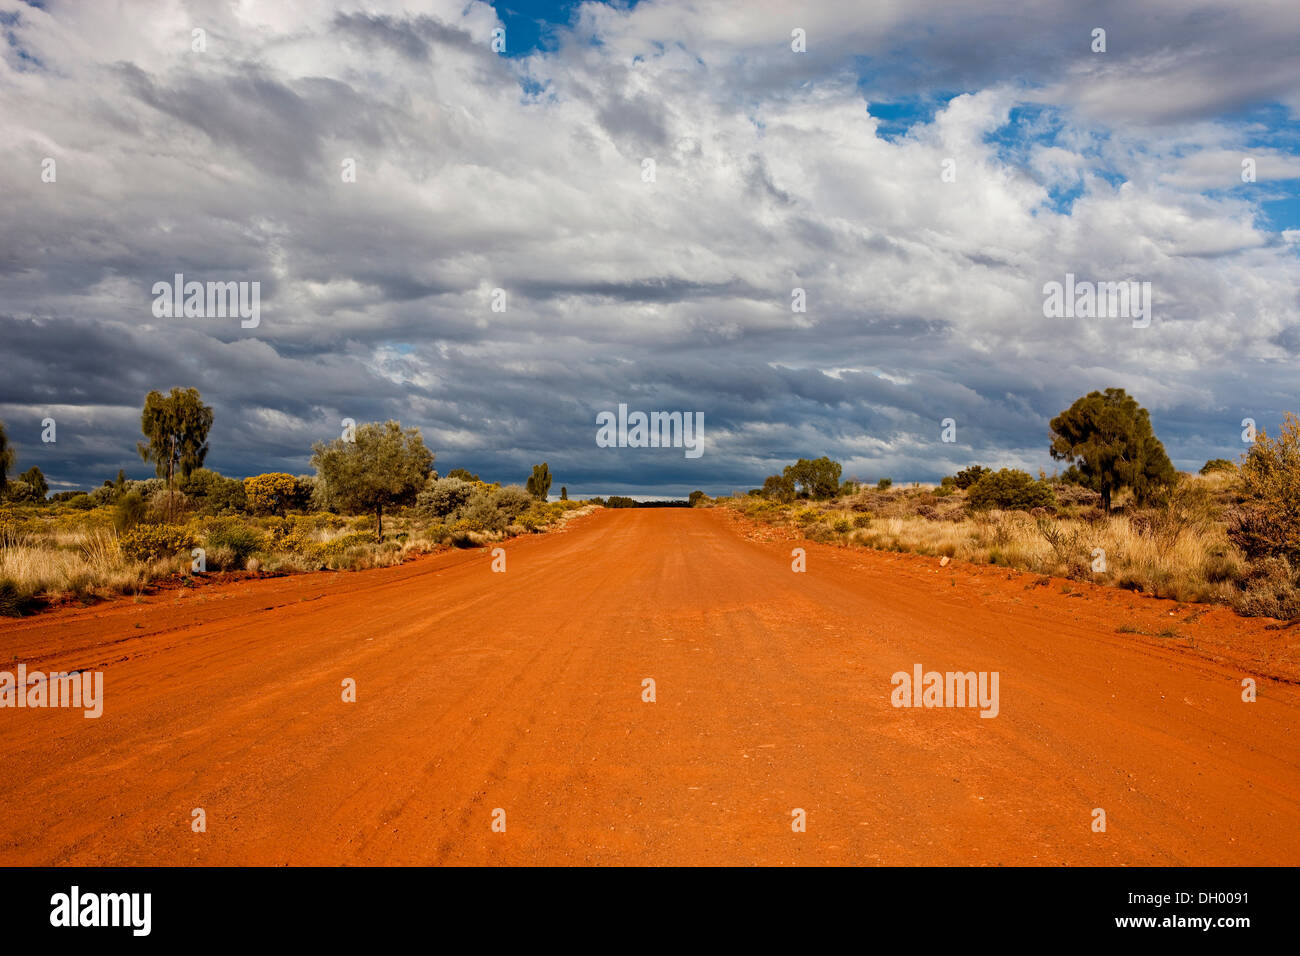 Dirt road through the outback, Northern Territory, Australia Stock Photo